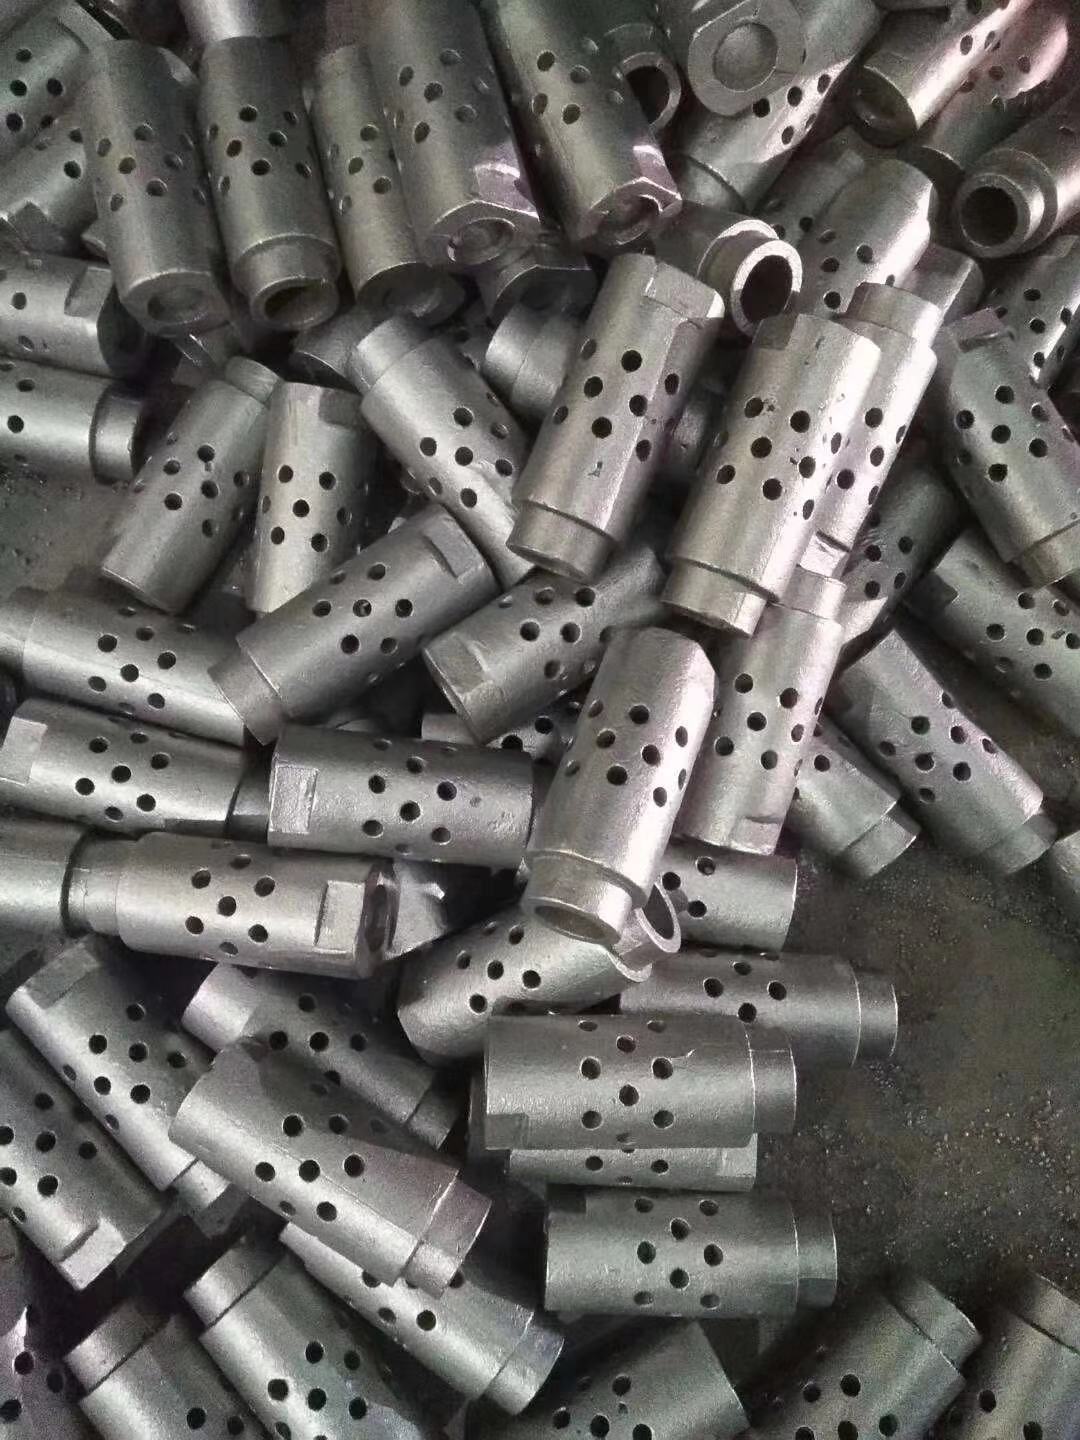 Indonesia power plant coal fired CFBC boiler nozzle